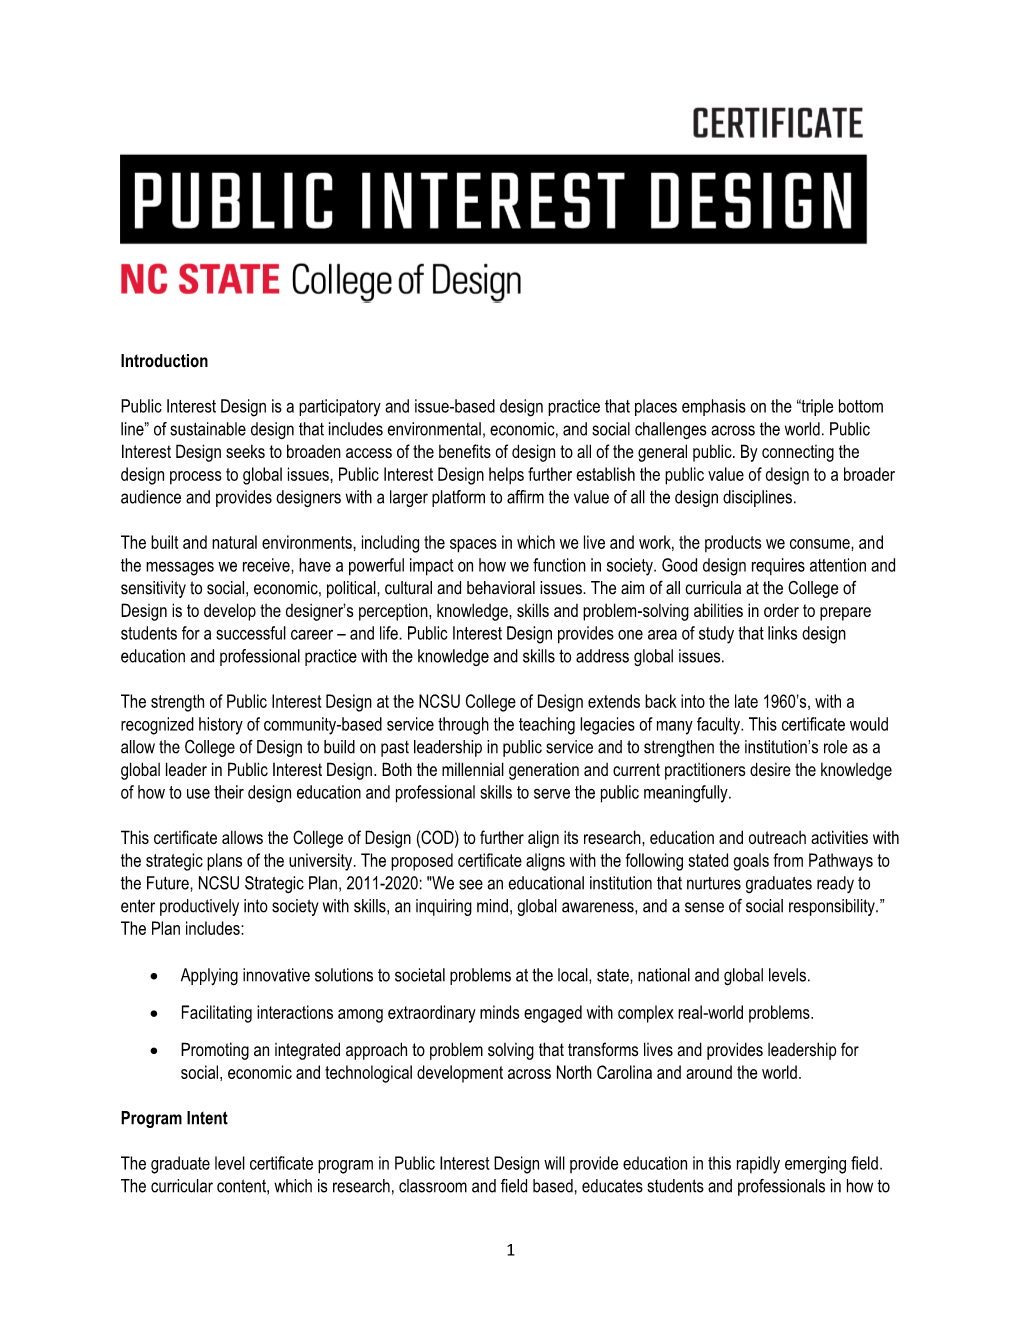 Public Interest Design Certificate Program Will Join an Academic and Professional Community That Offers a Broad Range of Extracurricular Activities